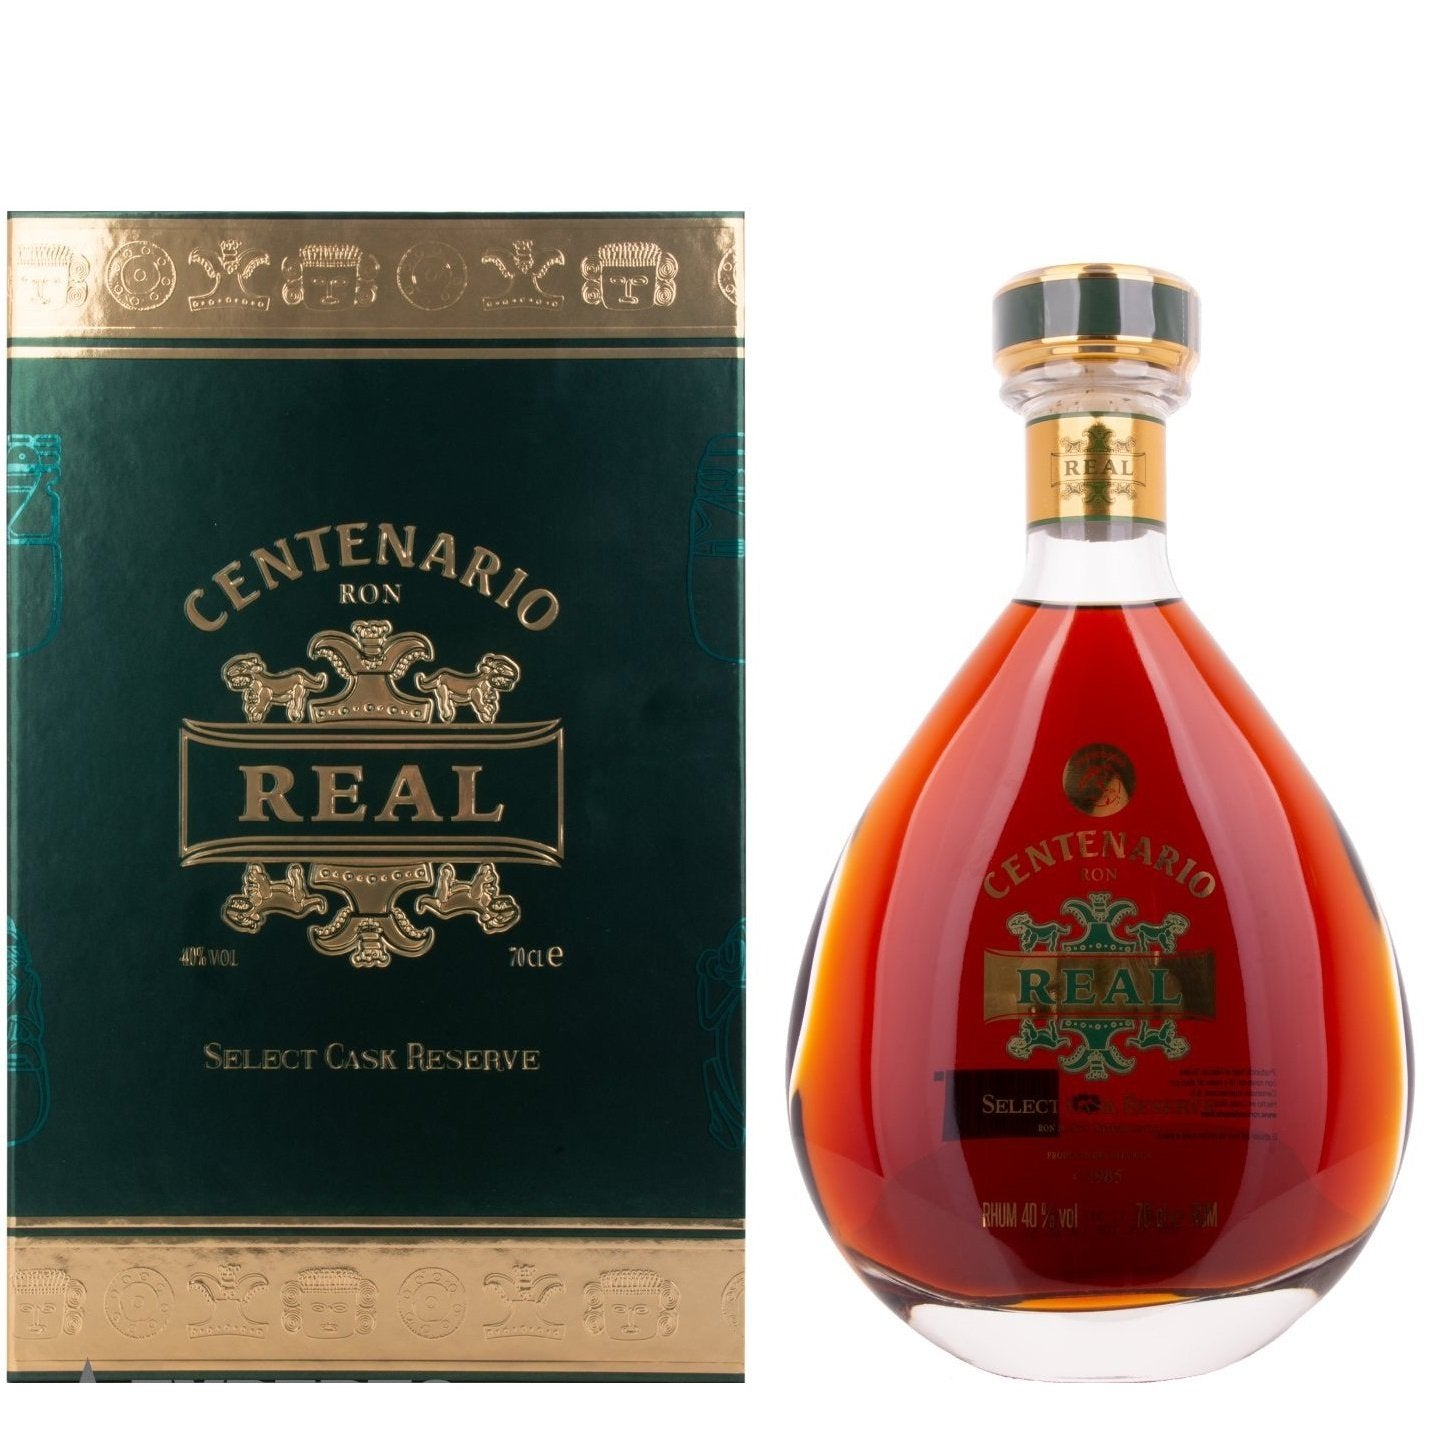 Ron Centenario REAL Select Vol. Cask - Reserve Old 40% Rum Edition 0,7